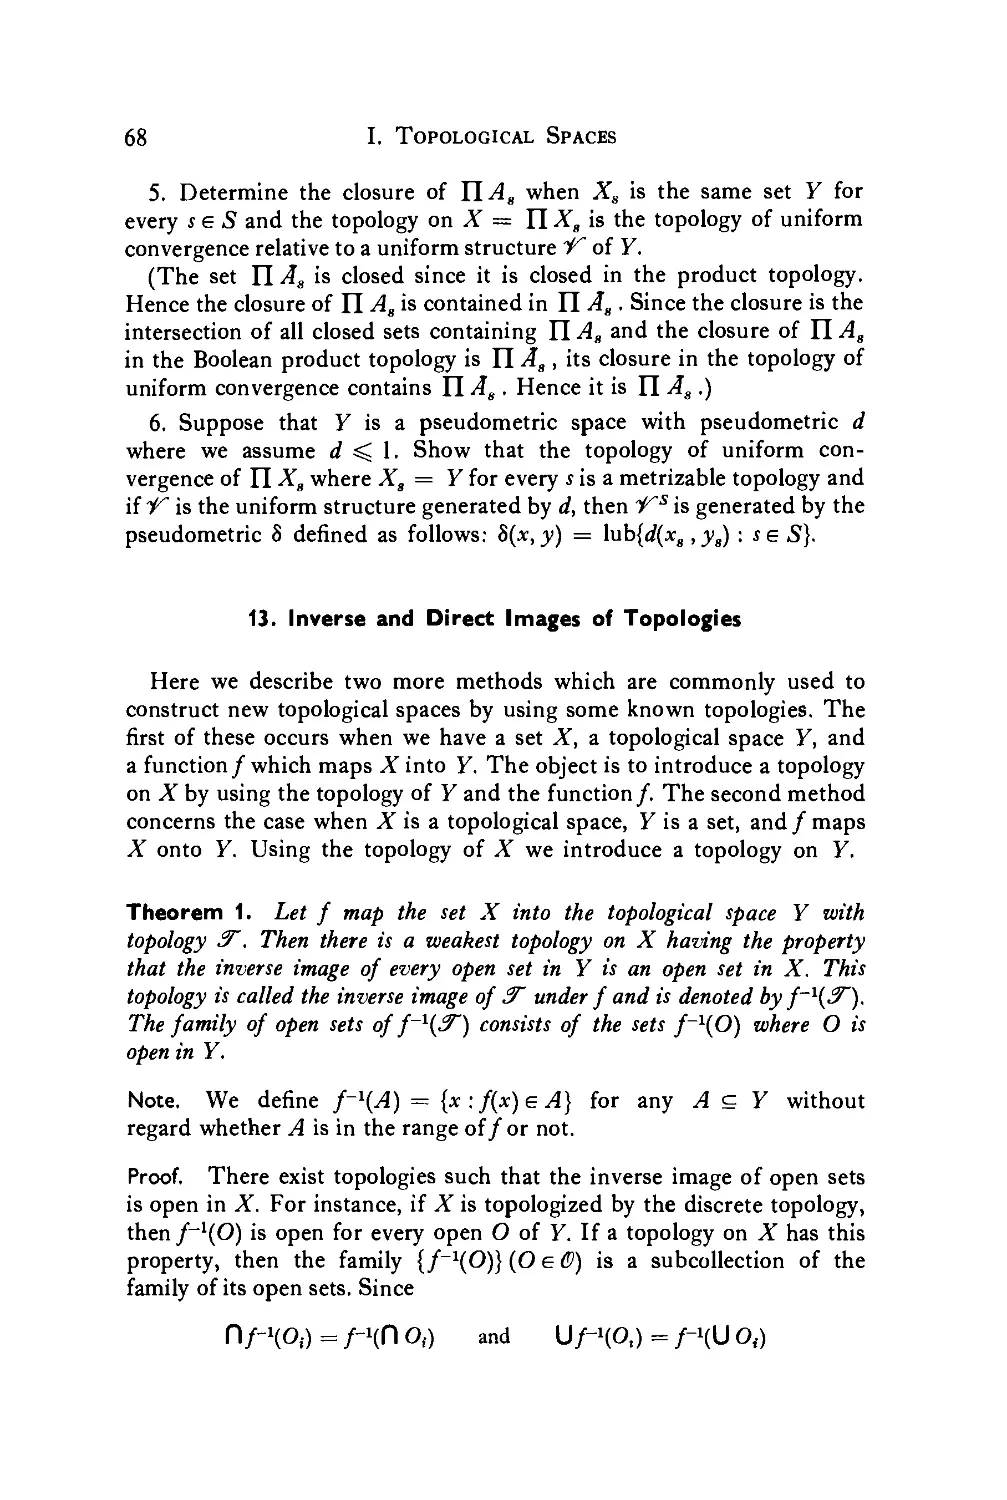 13. Inverse and Direct Images of Topologies